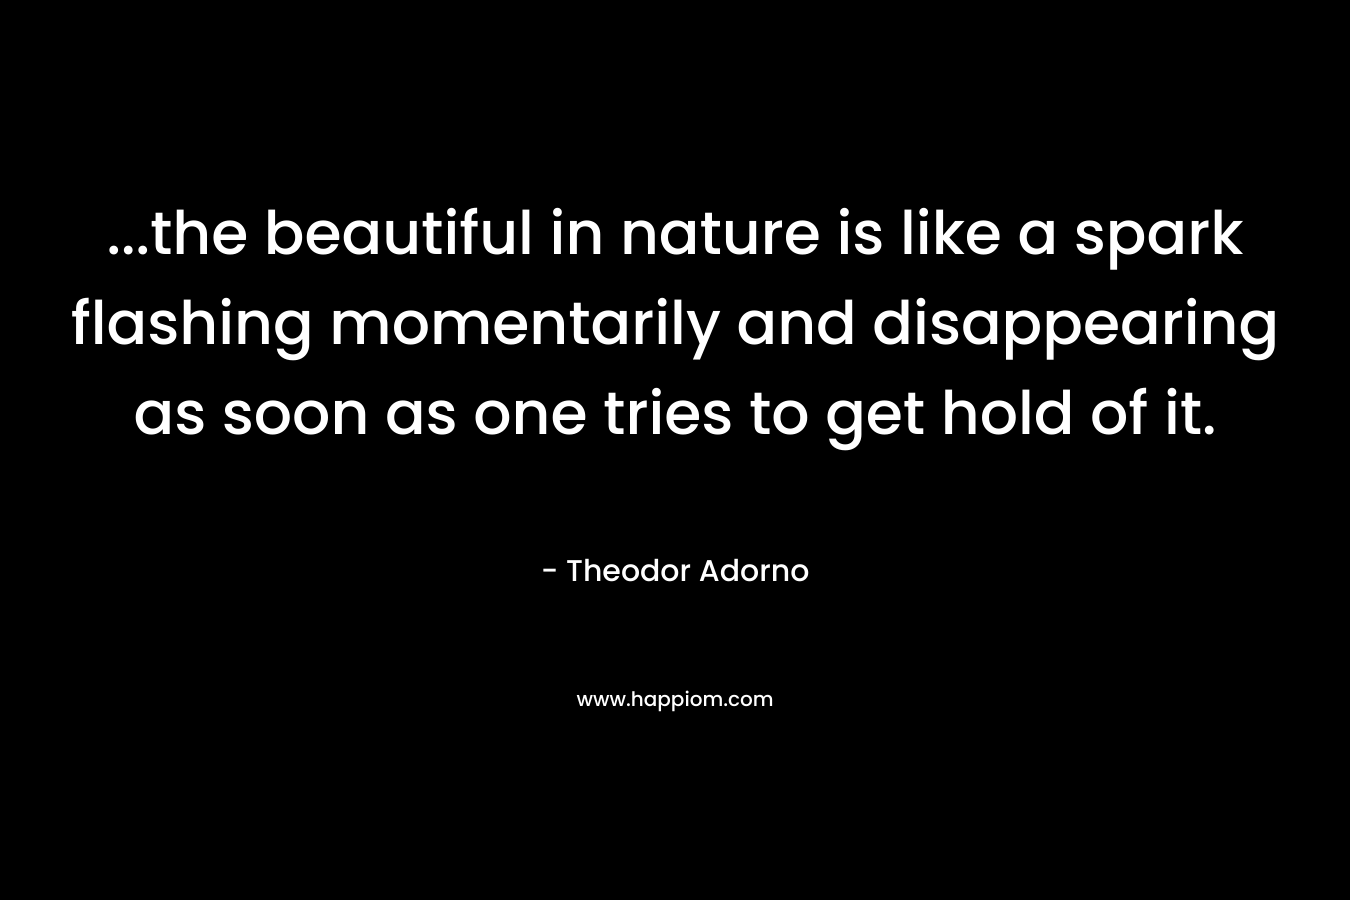 …the beautiful in nature is like a spark flashing momentarily and disappearing as soon as one tries to get hold of it. – Theodor Adorno